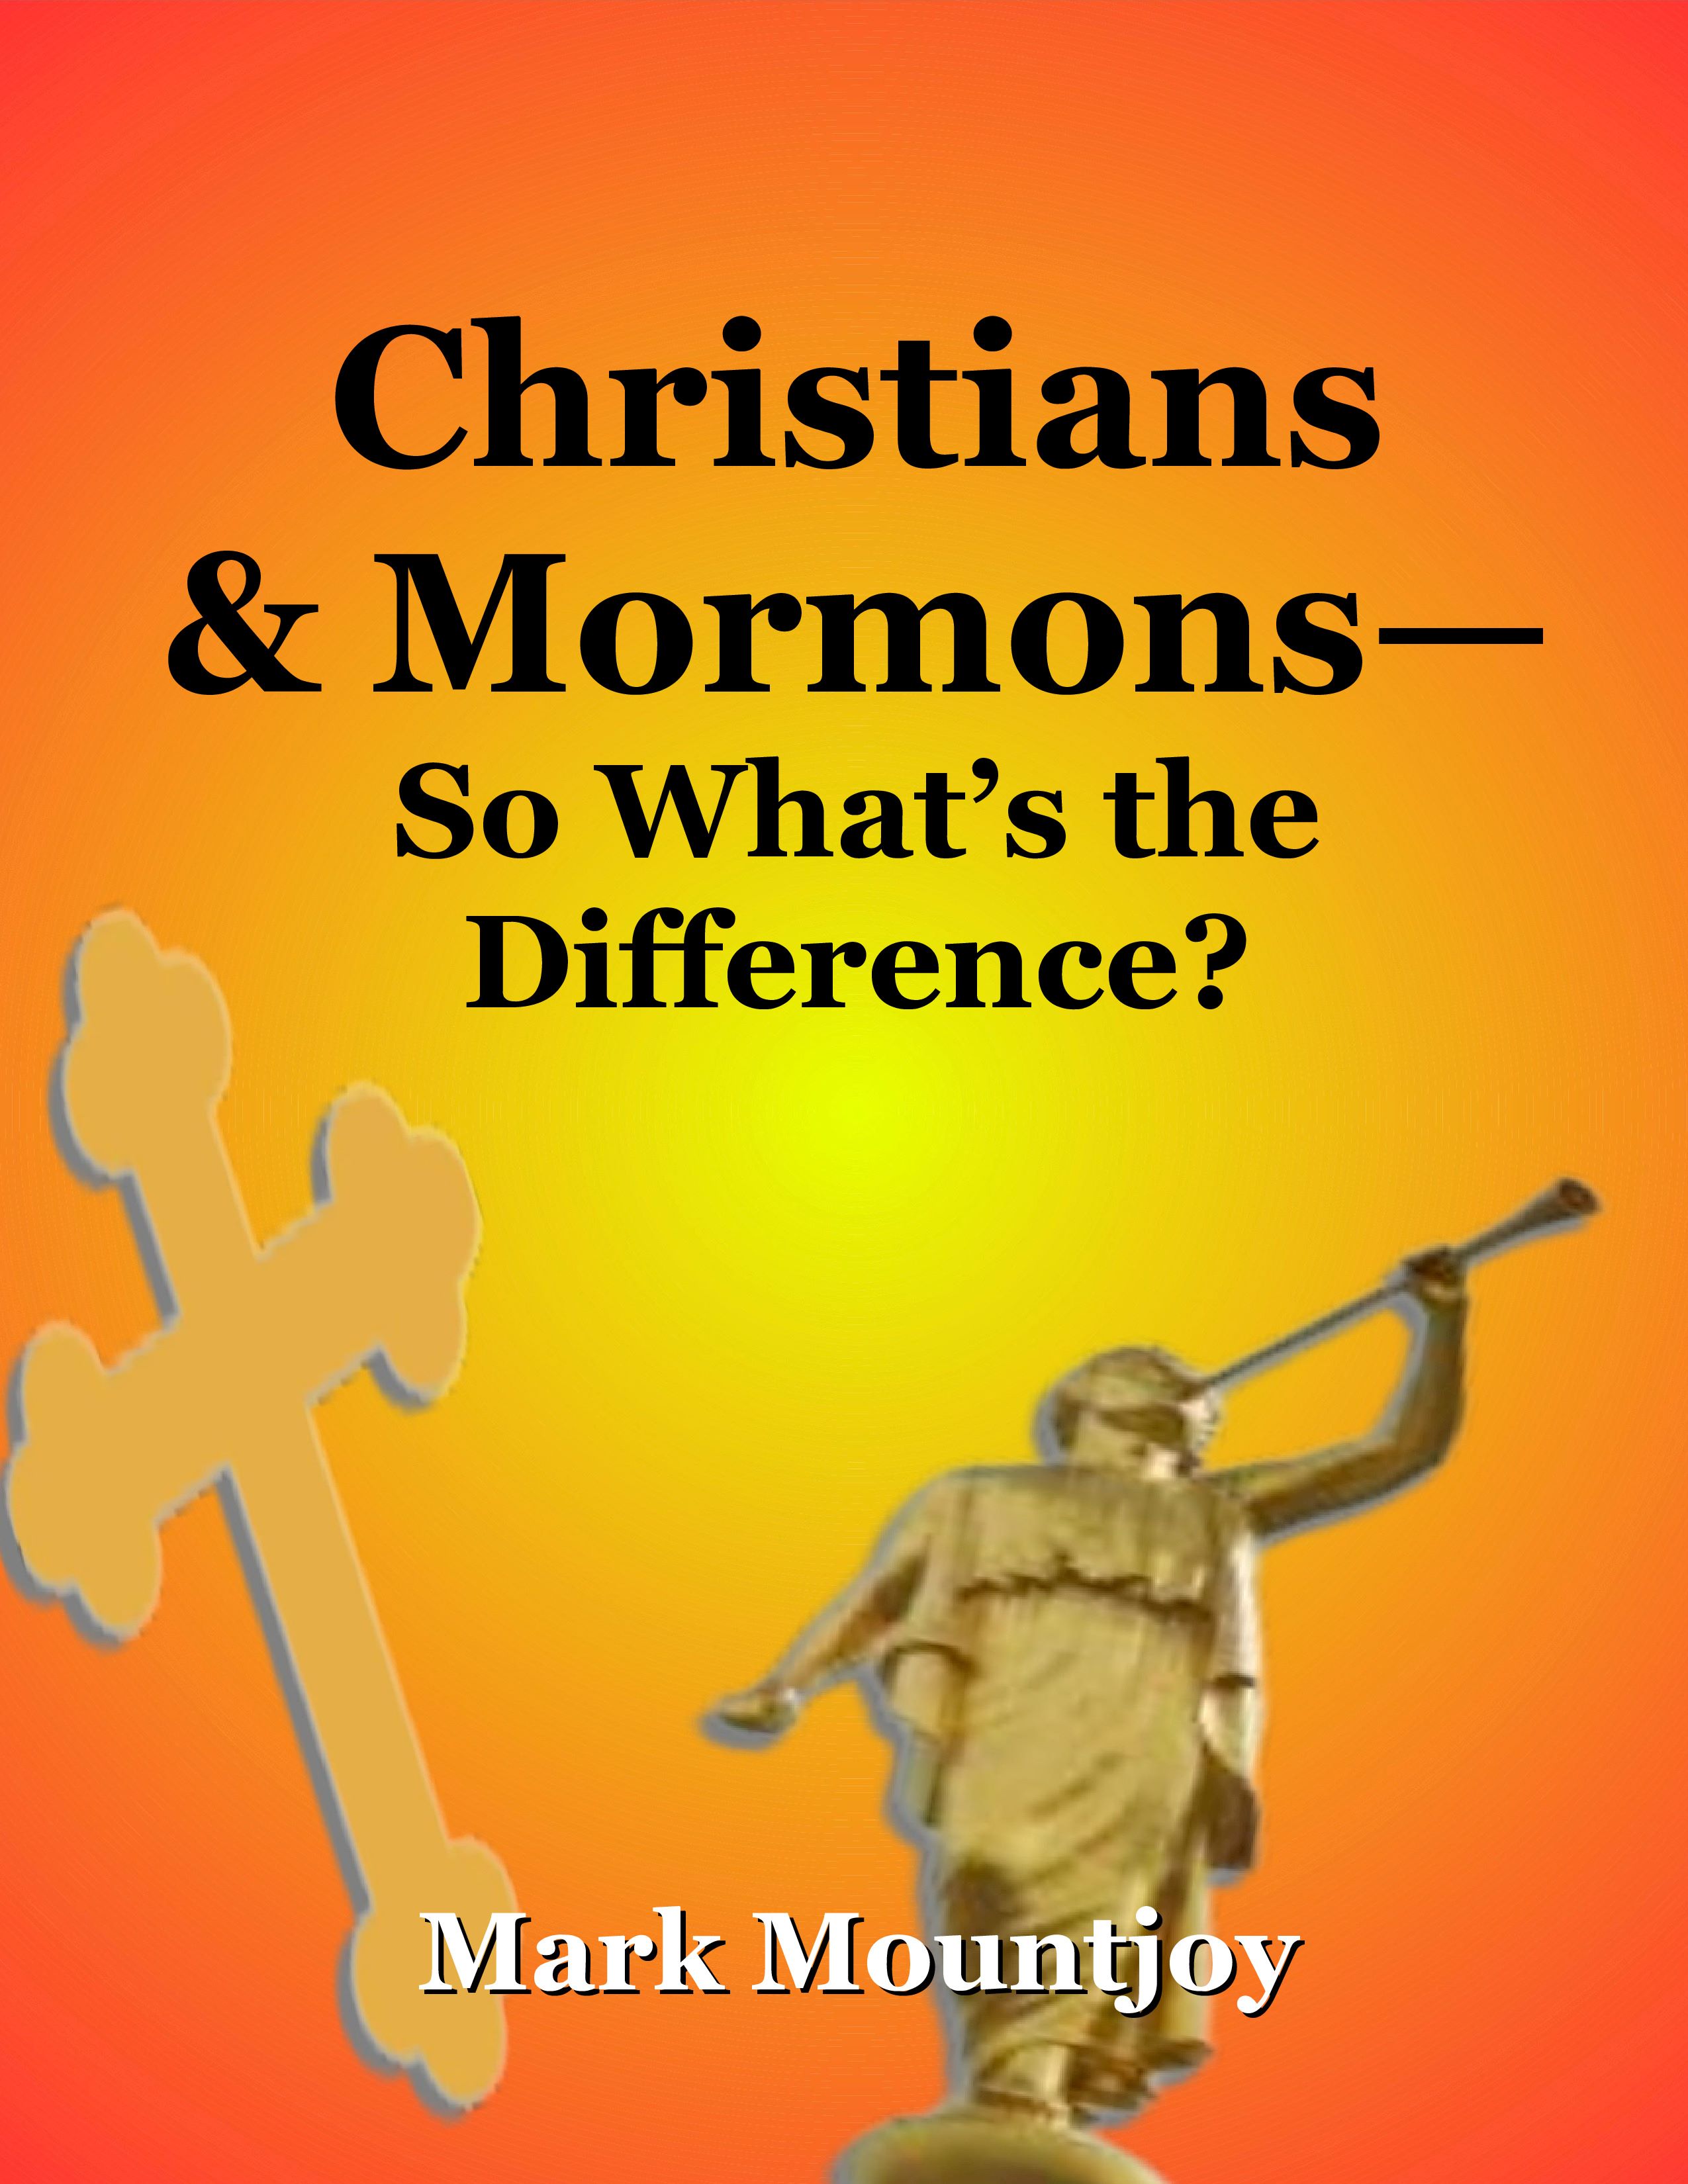 Christians Mormons So What the Difference Jacket Art REVISED 4 15 24